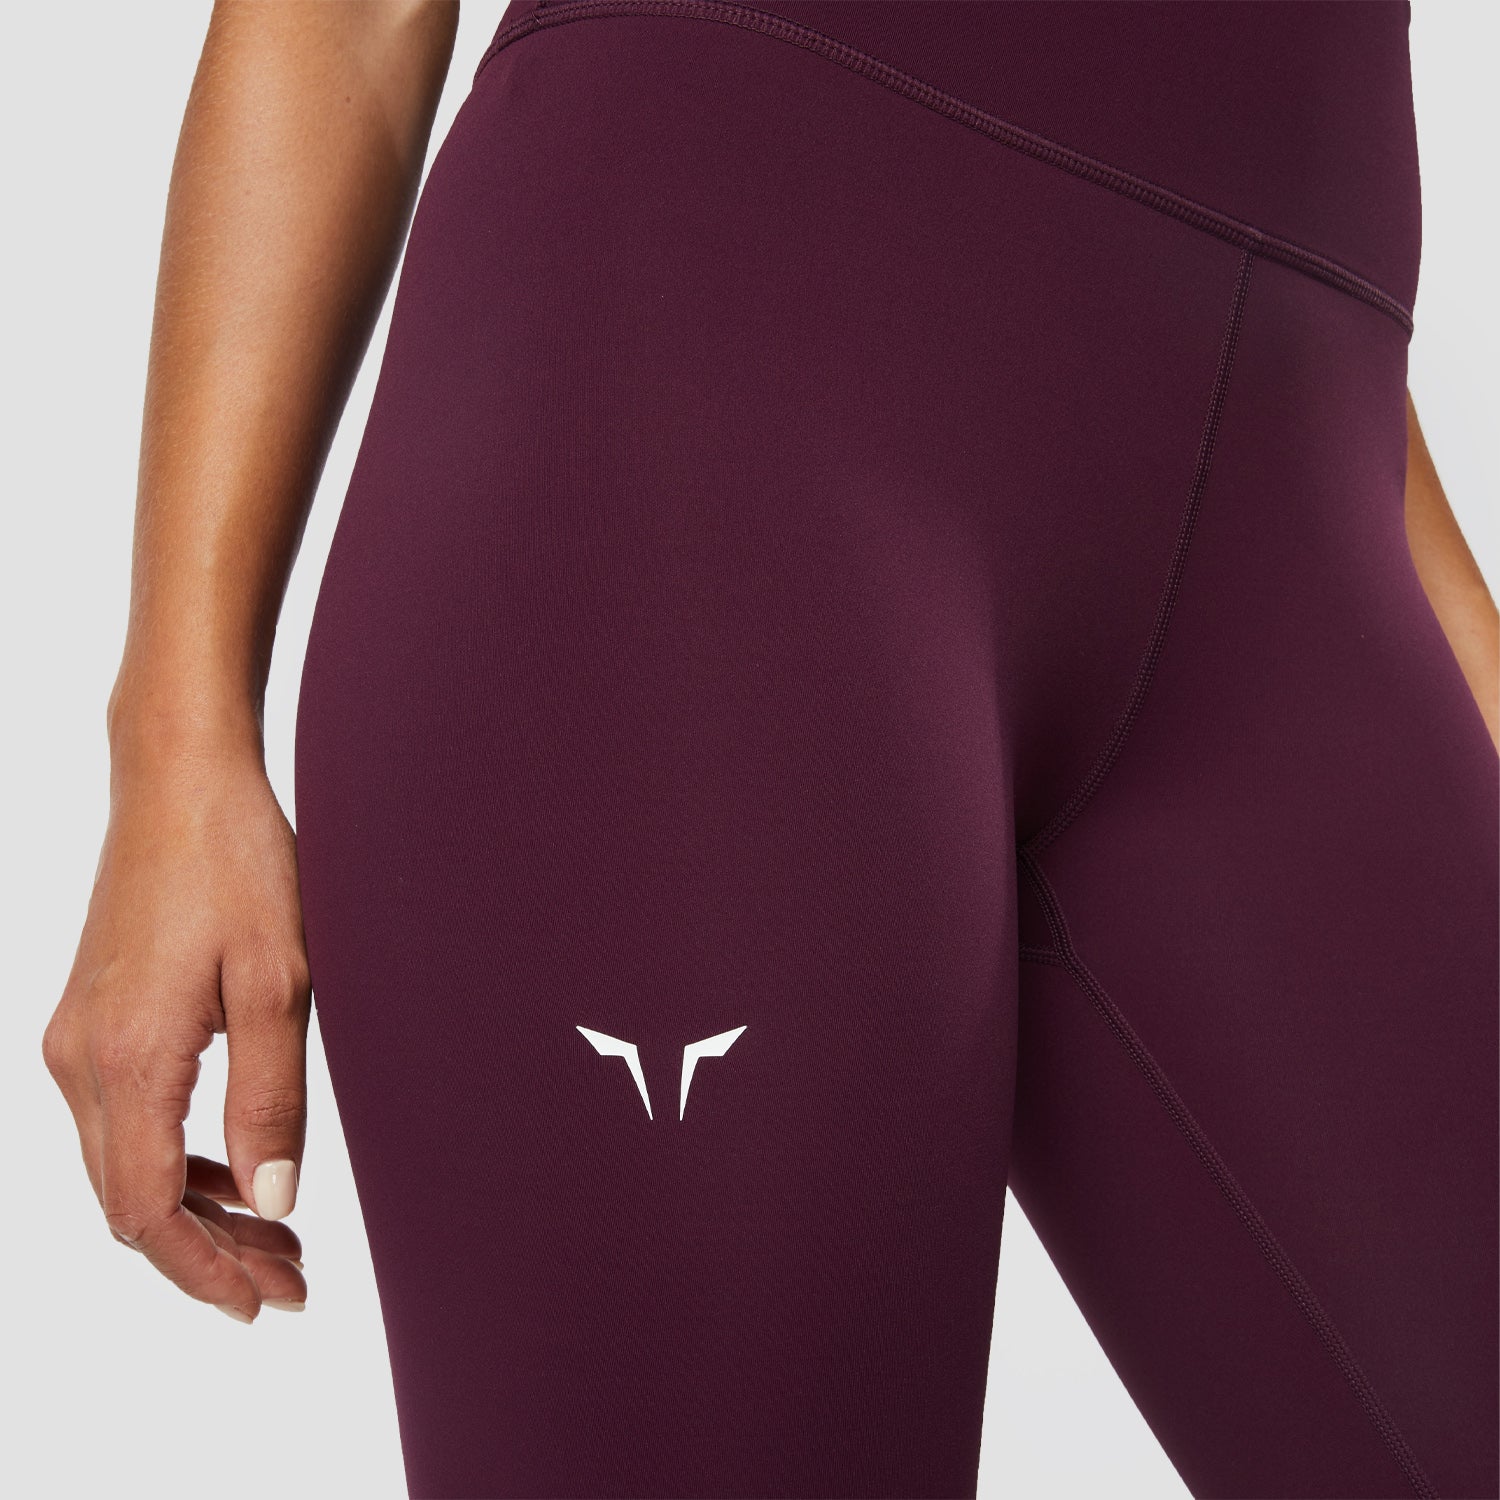 squatwolf-workout-clothes-womens-fitness-7-8-leggings-purple-gym-leggings-for-women